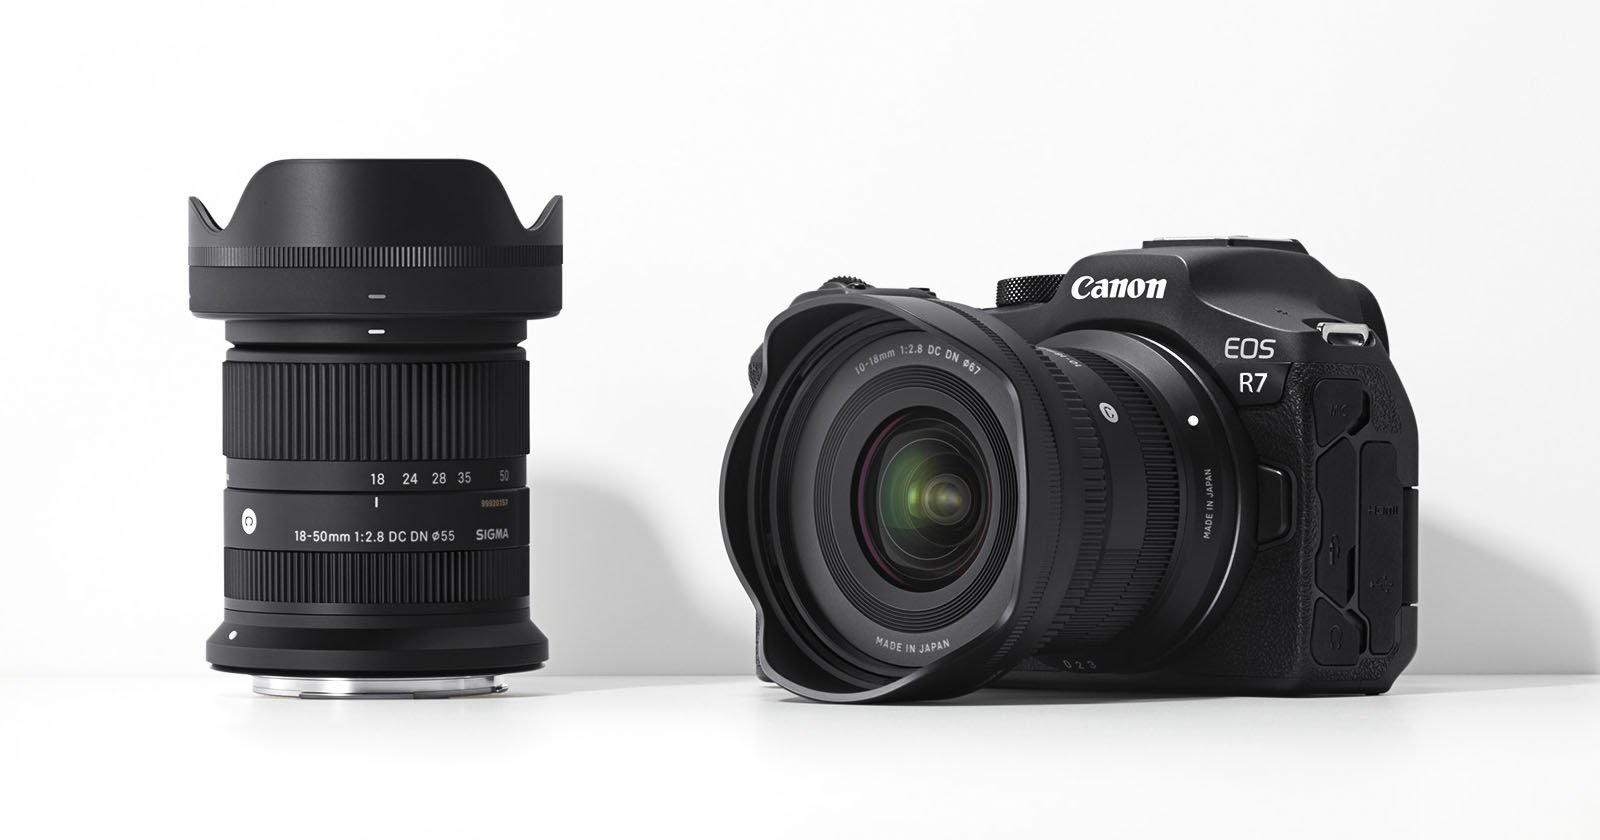 A canon eos r7 camera accompanied by two lenses—the ef-m 18-150mm and sigma 56mm—displayed against a plain white background.